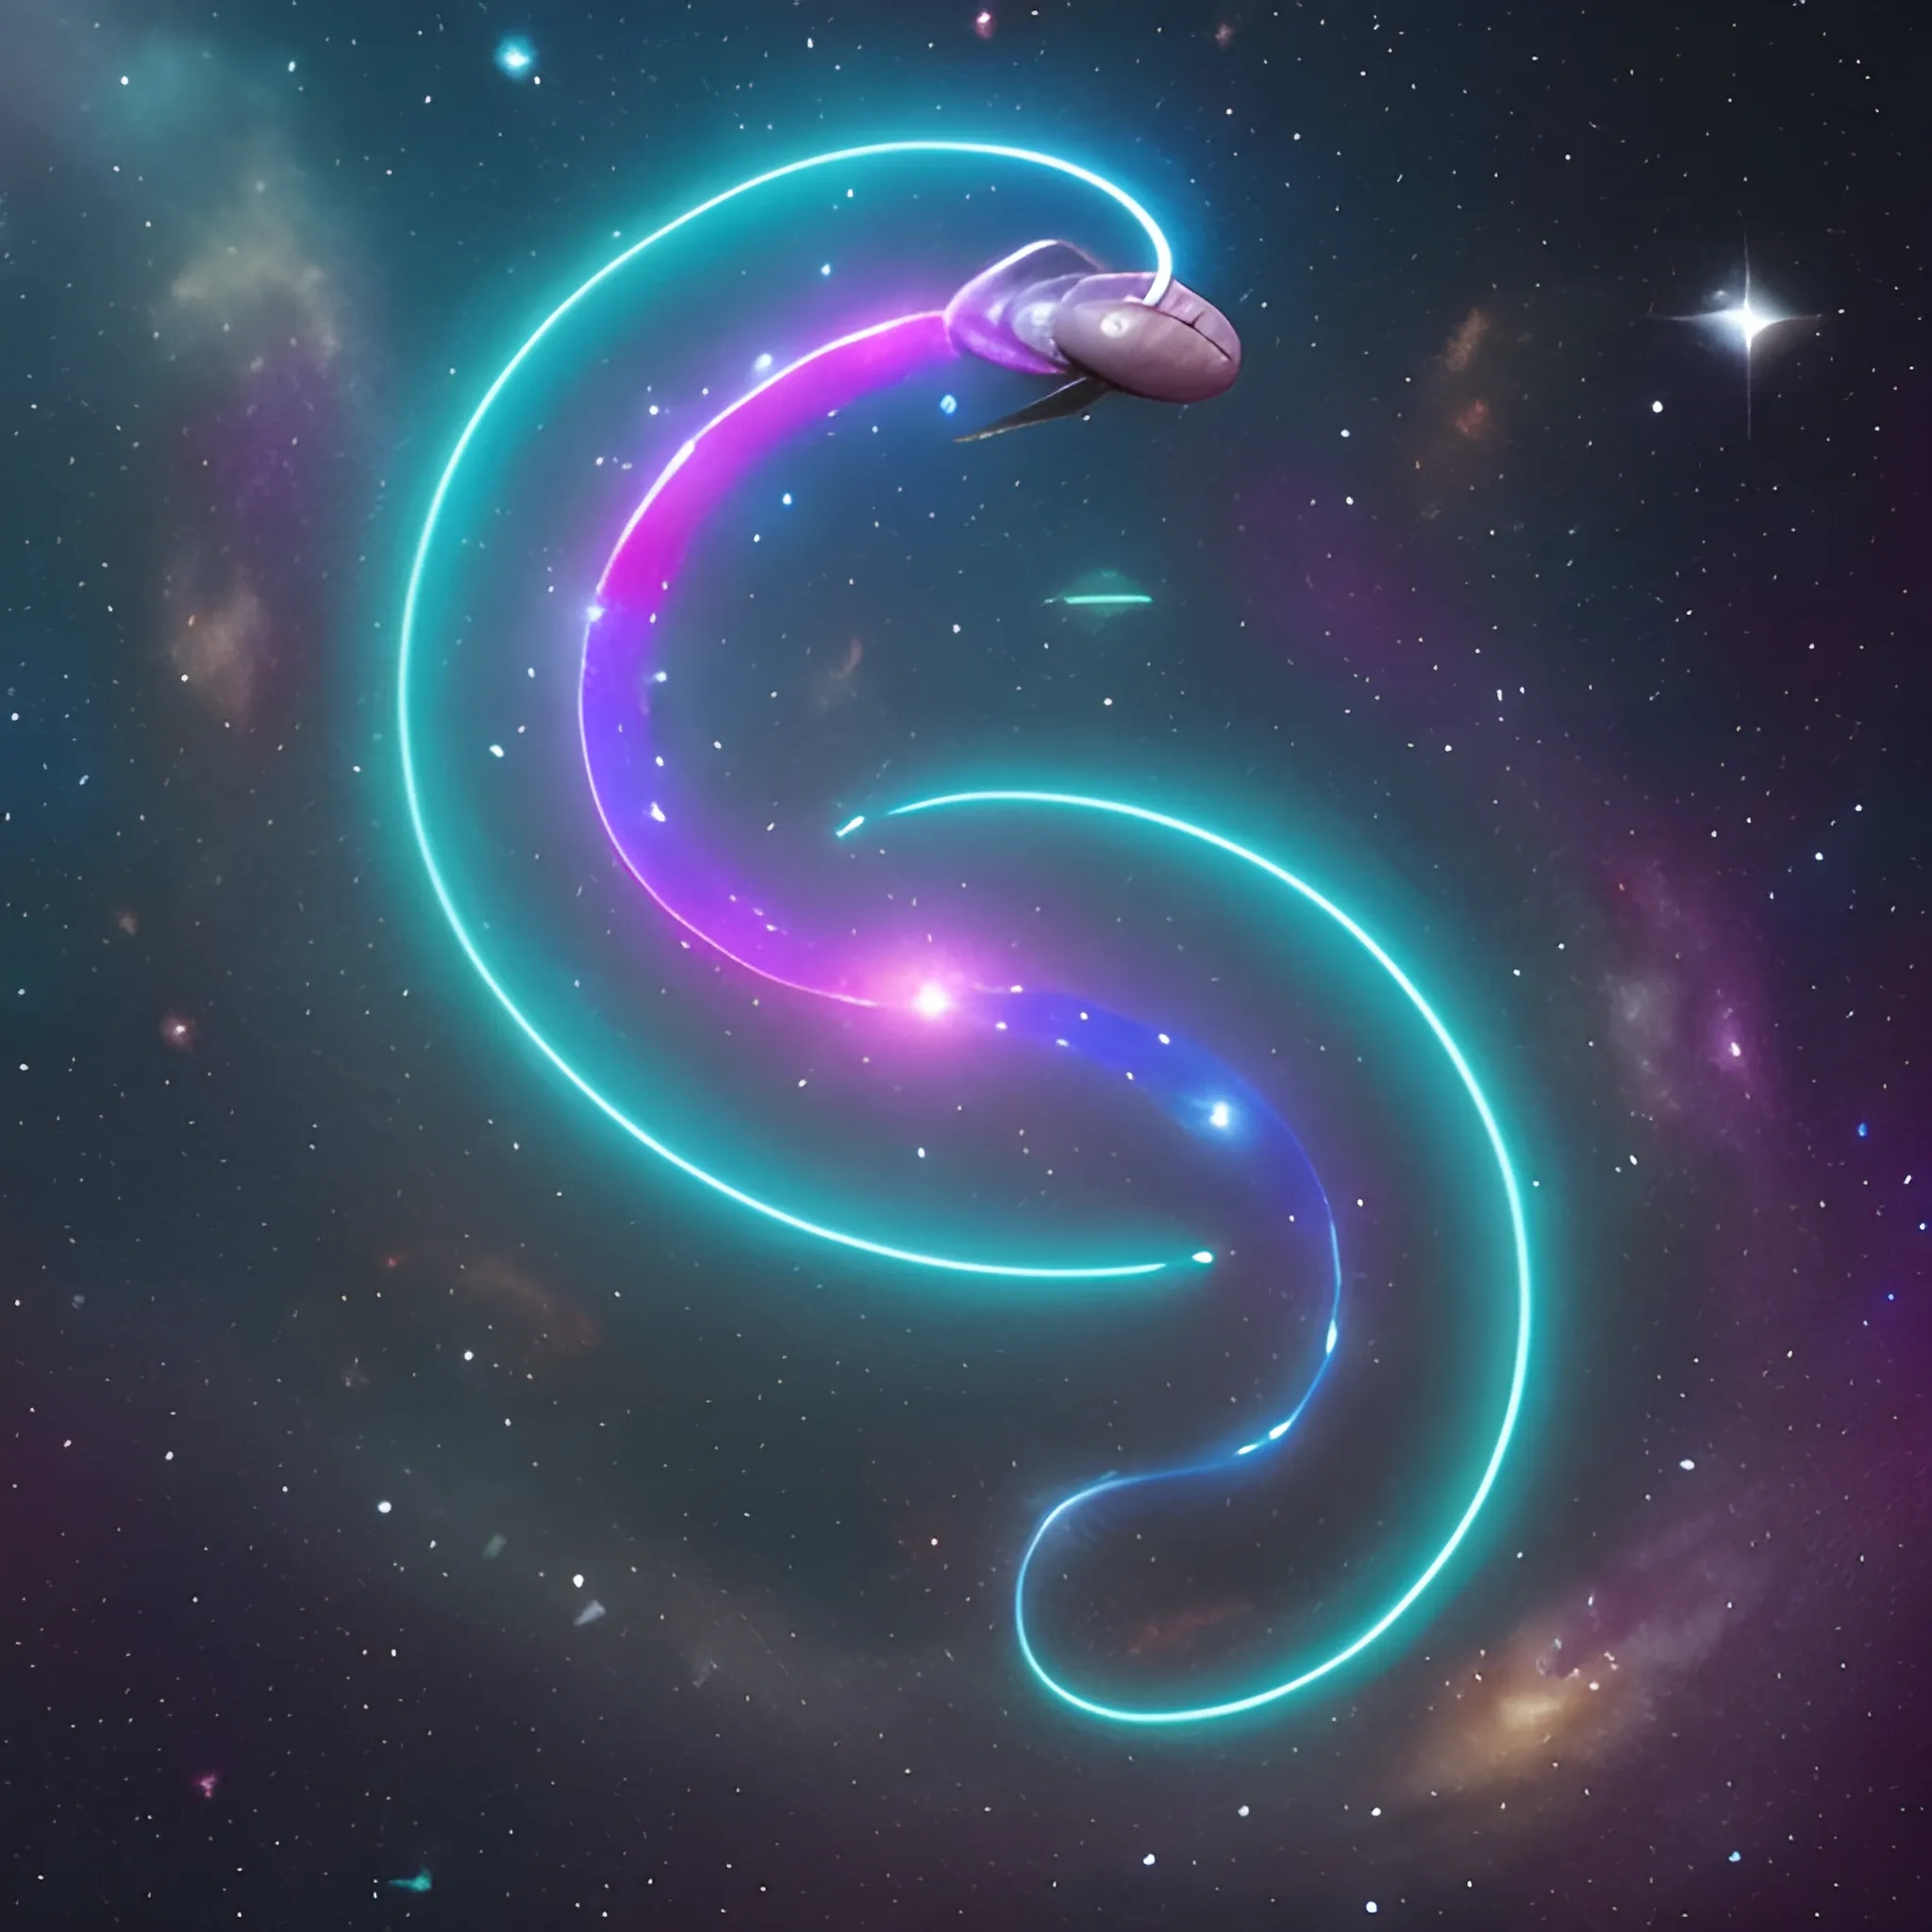 a space snake flying through the cosmos